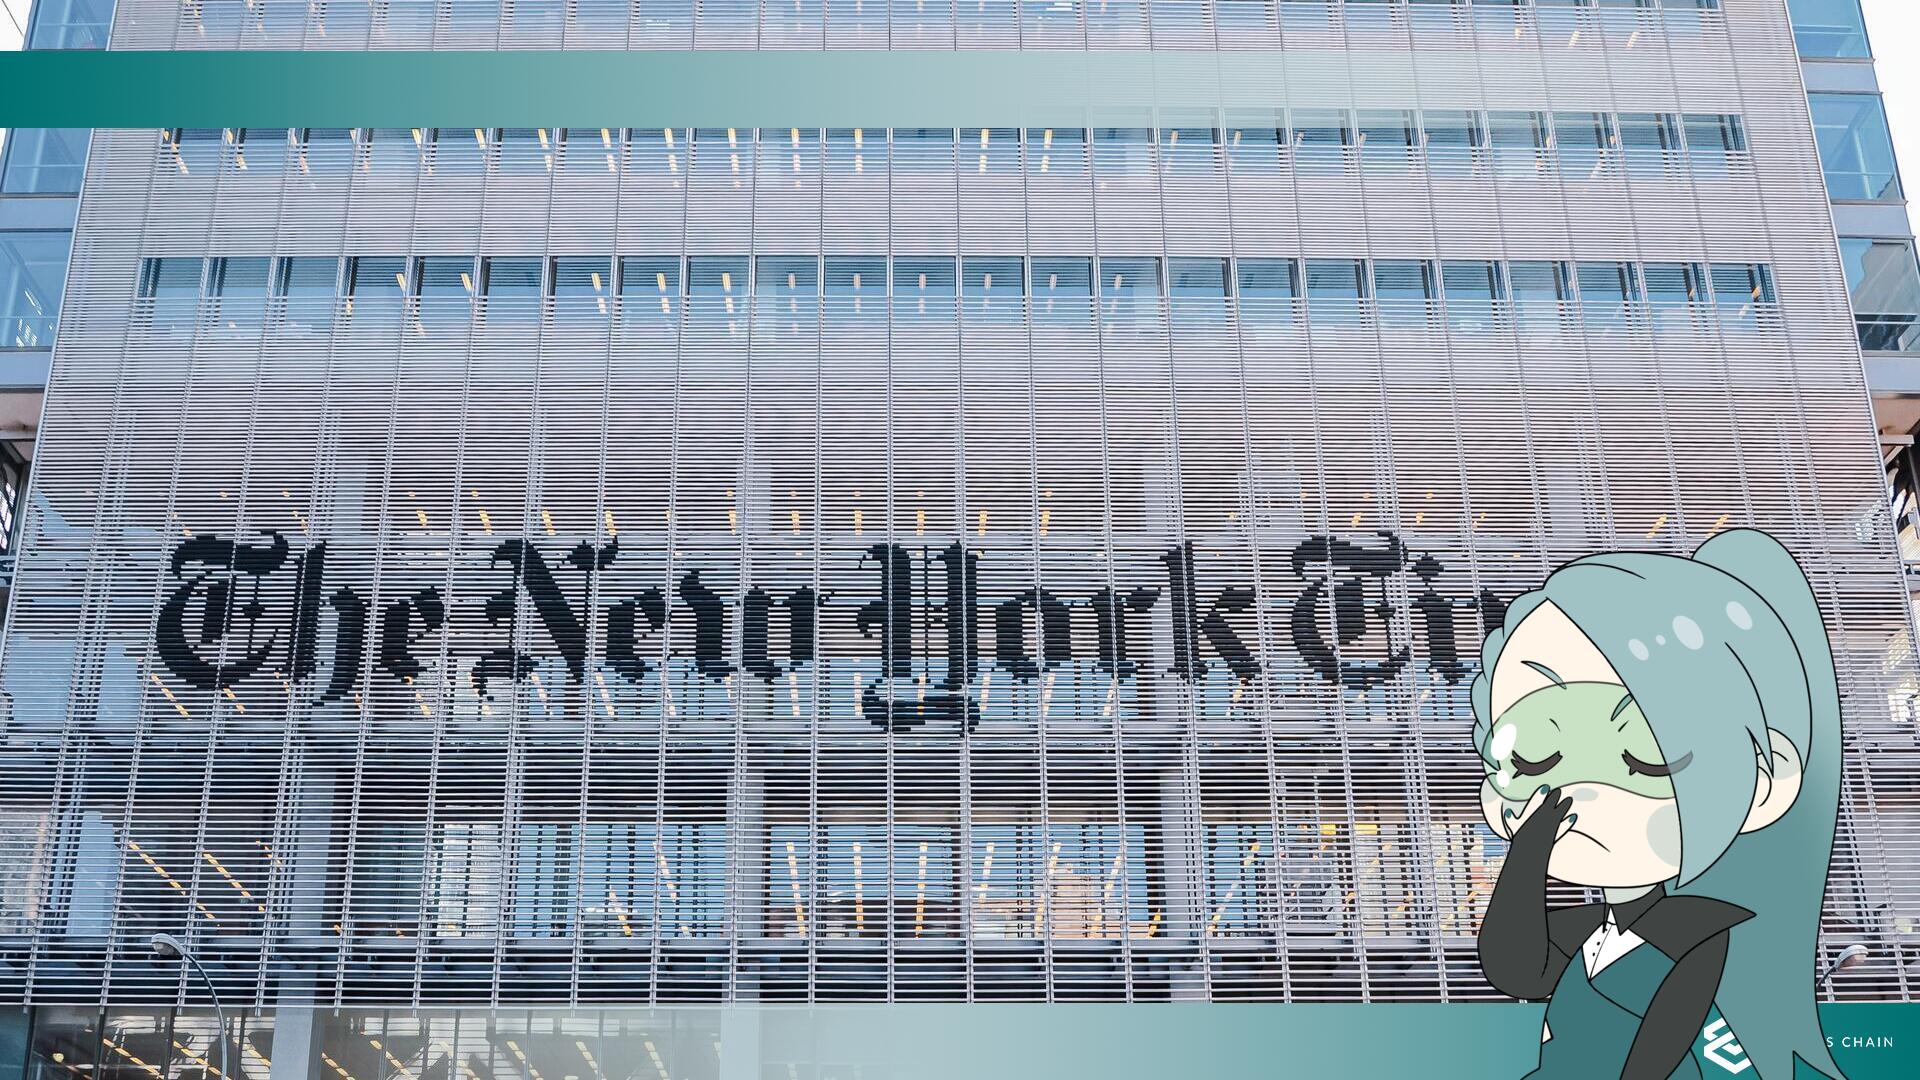  Microsoft asks to dismiss New York Times’s ‘doomsday’ copyright lawsuit.